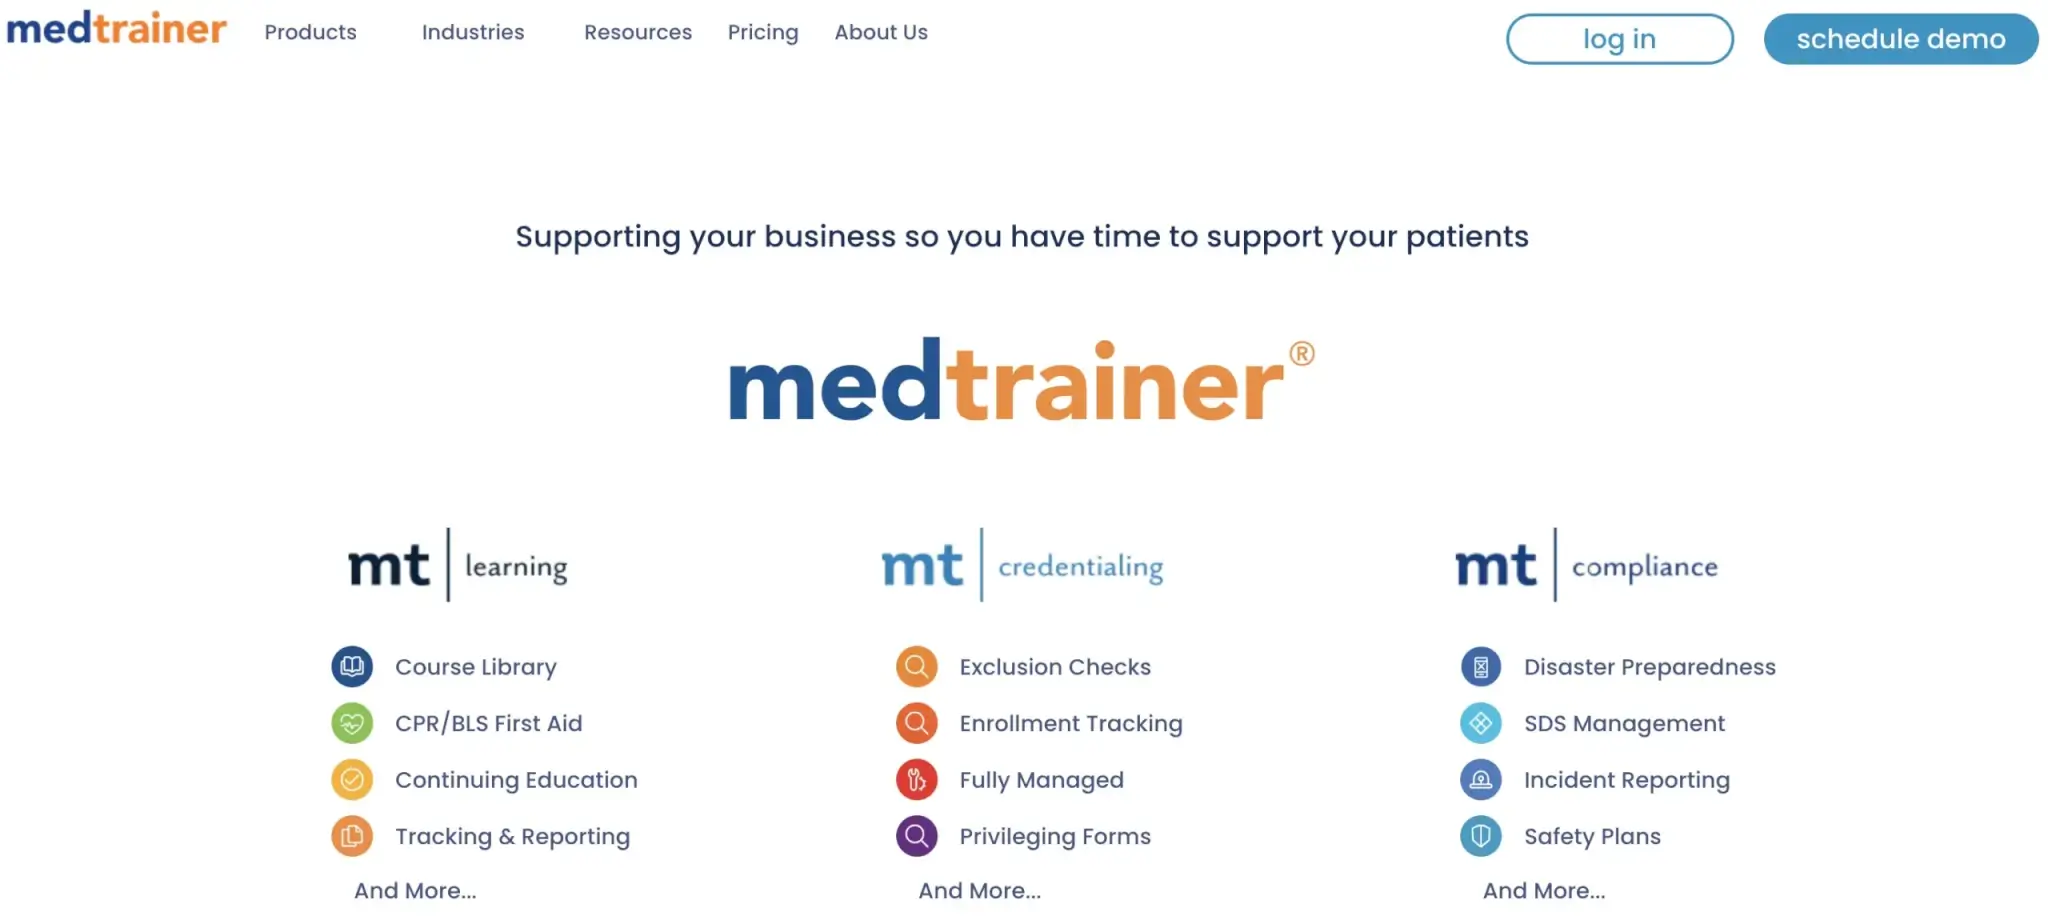 an image of the medtrainer LMS landing page showing the platform's key features